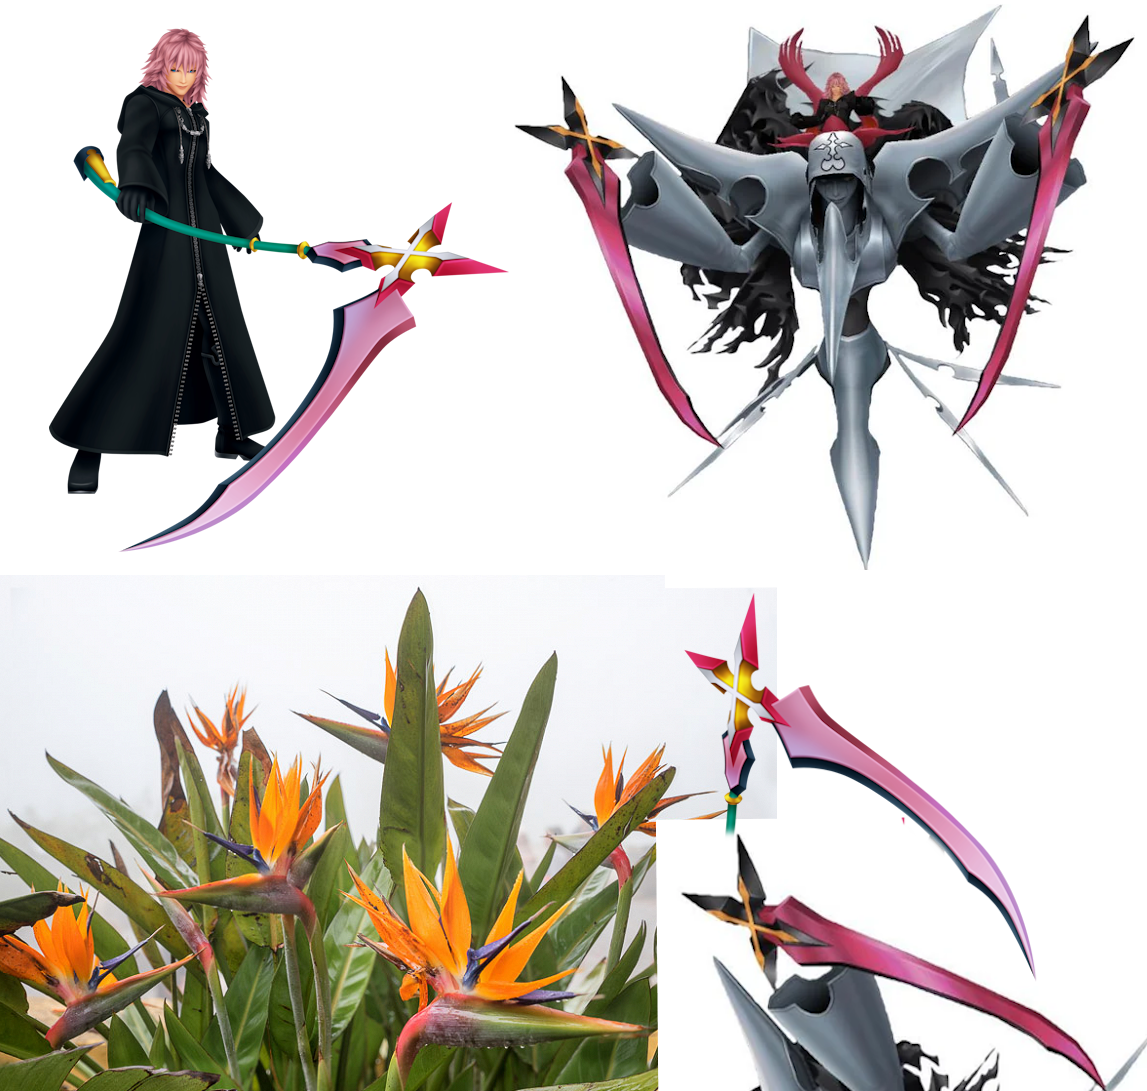 The “X” share of the scythes which will be on the Specter No one are orange instead of white adore they are on Marluxia’s scythe. I buy right here is to higher resemble the Strelitzia flower.